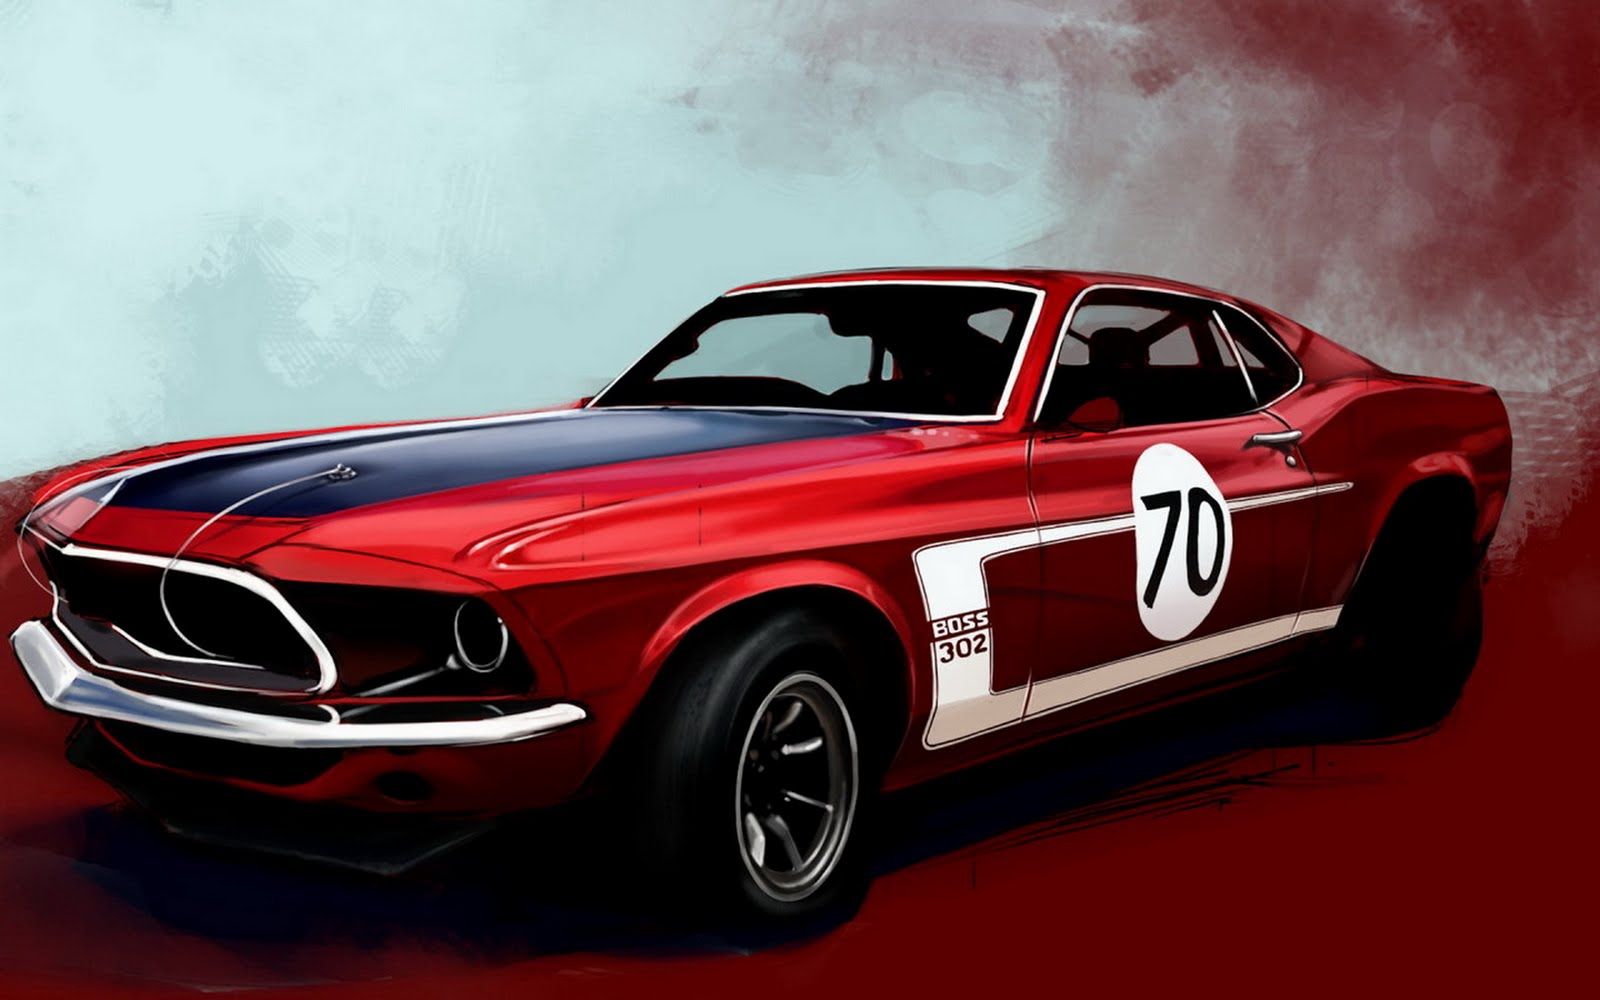 Wallpapers Hd Con Movimiento - Muscle Car Wallpaper Mustang , HD Wallpaper & Backgrounds